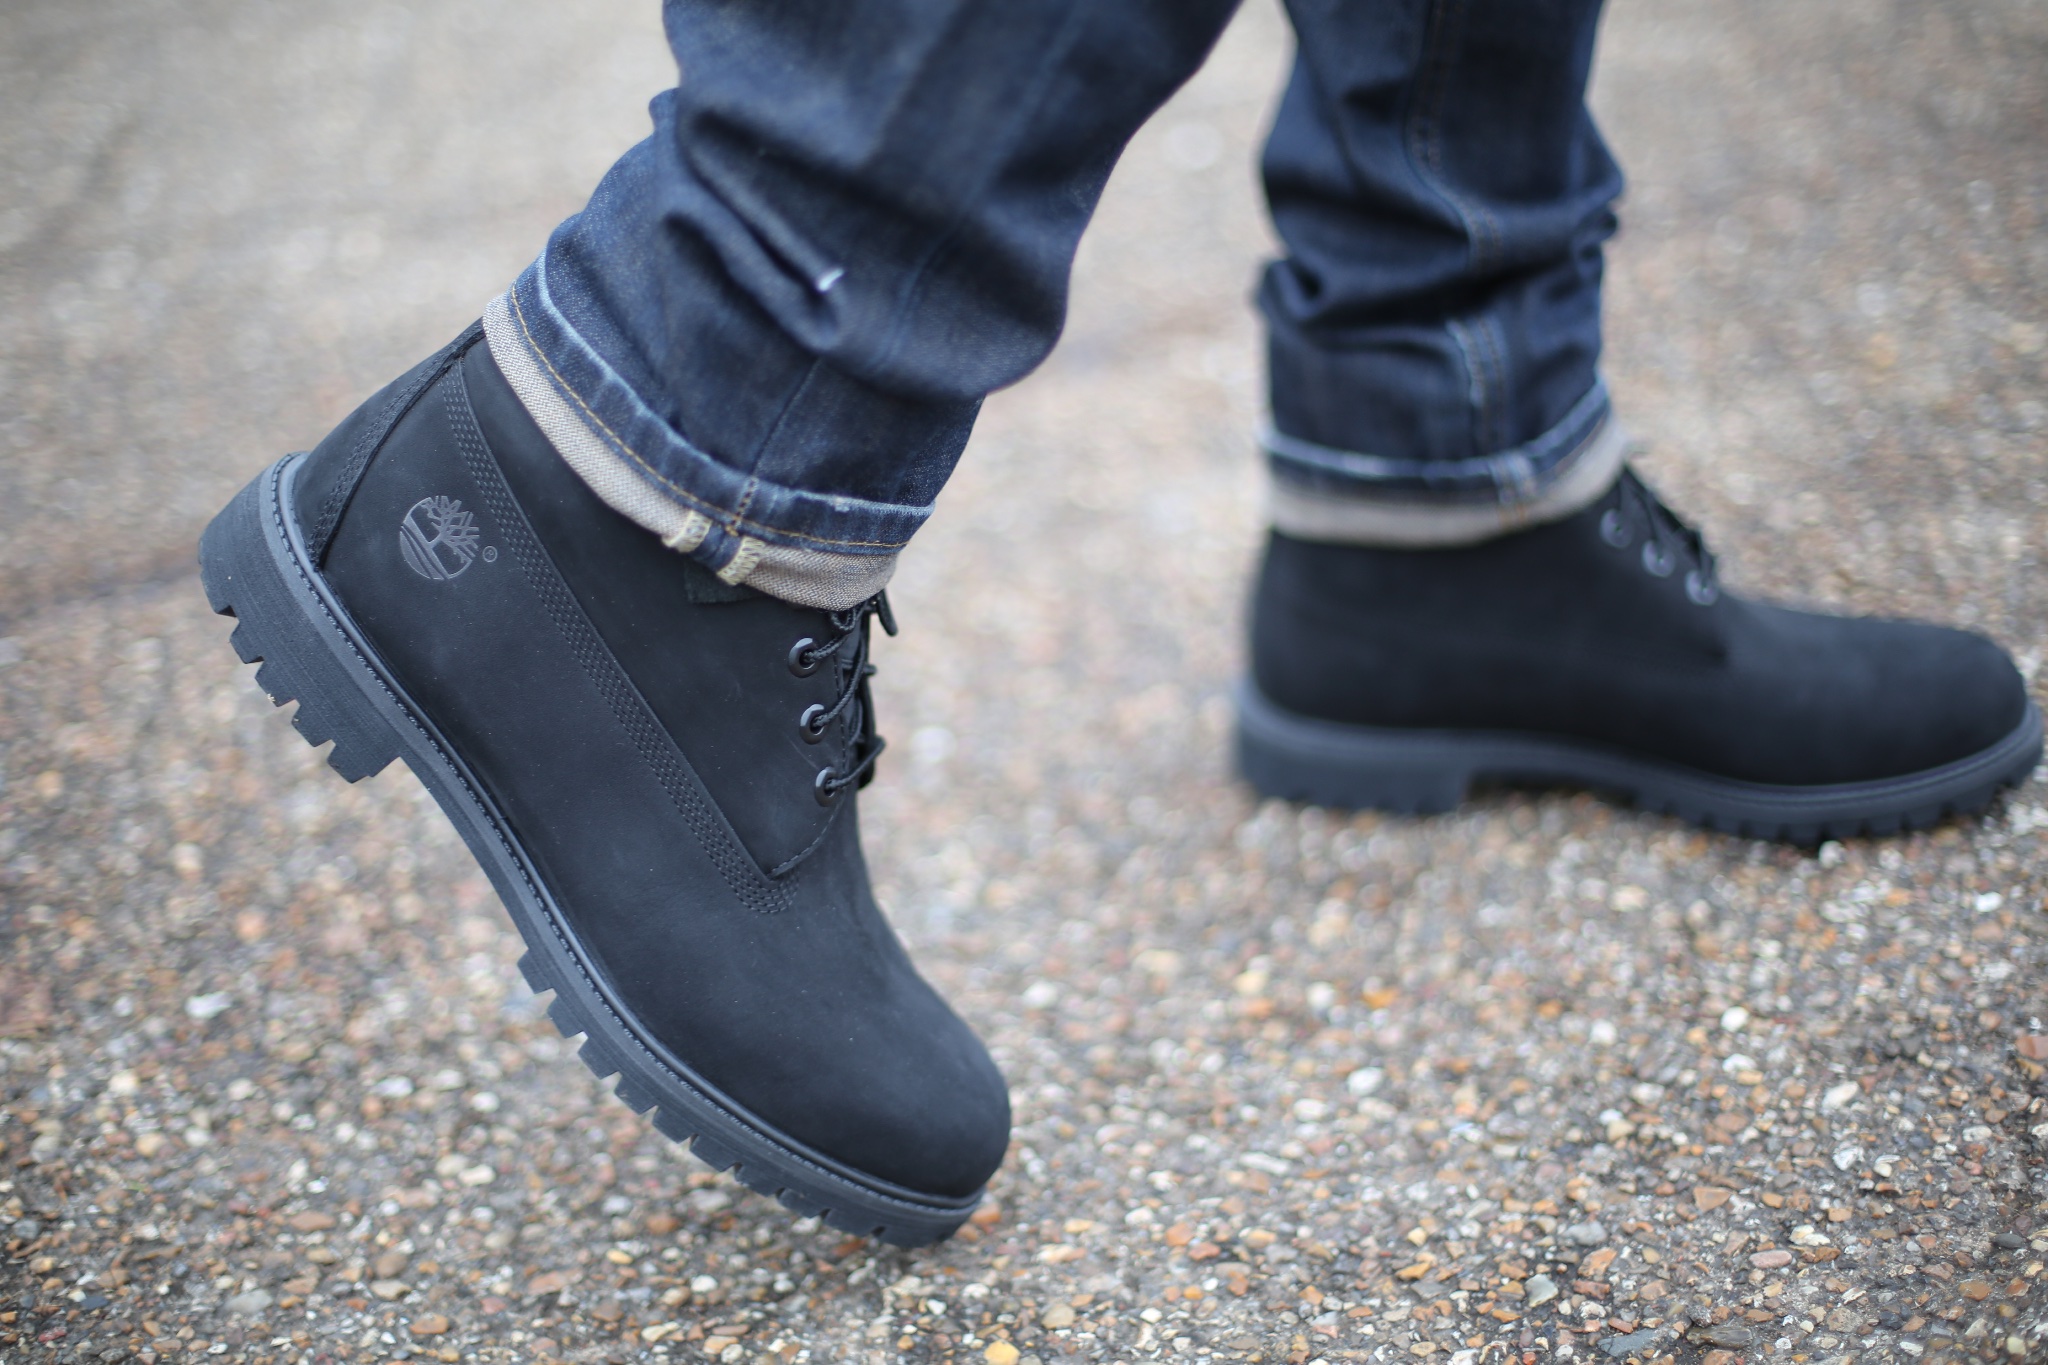 levi's timberland boots